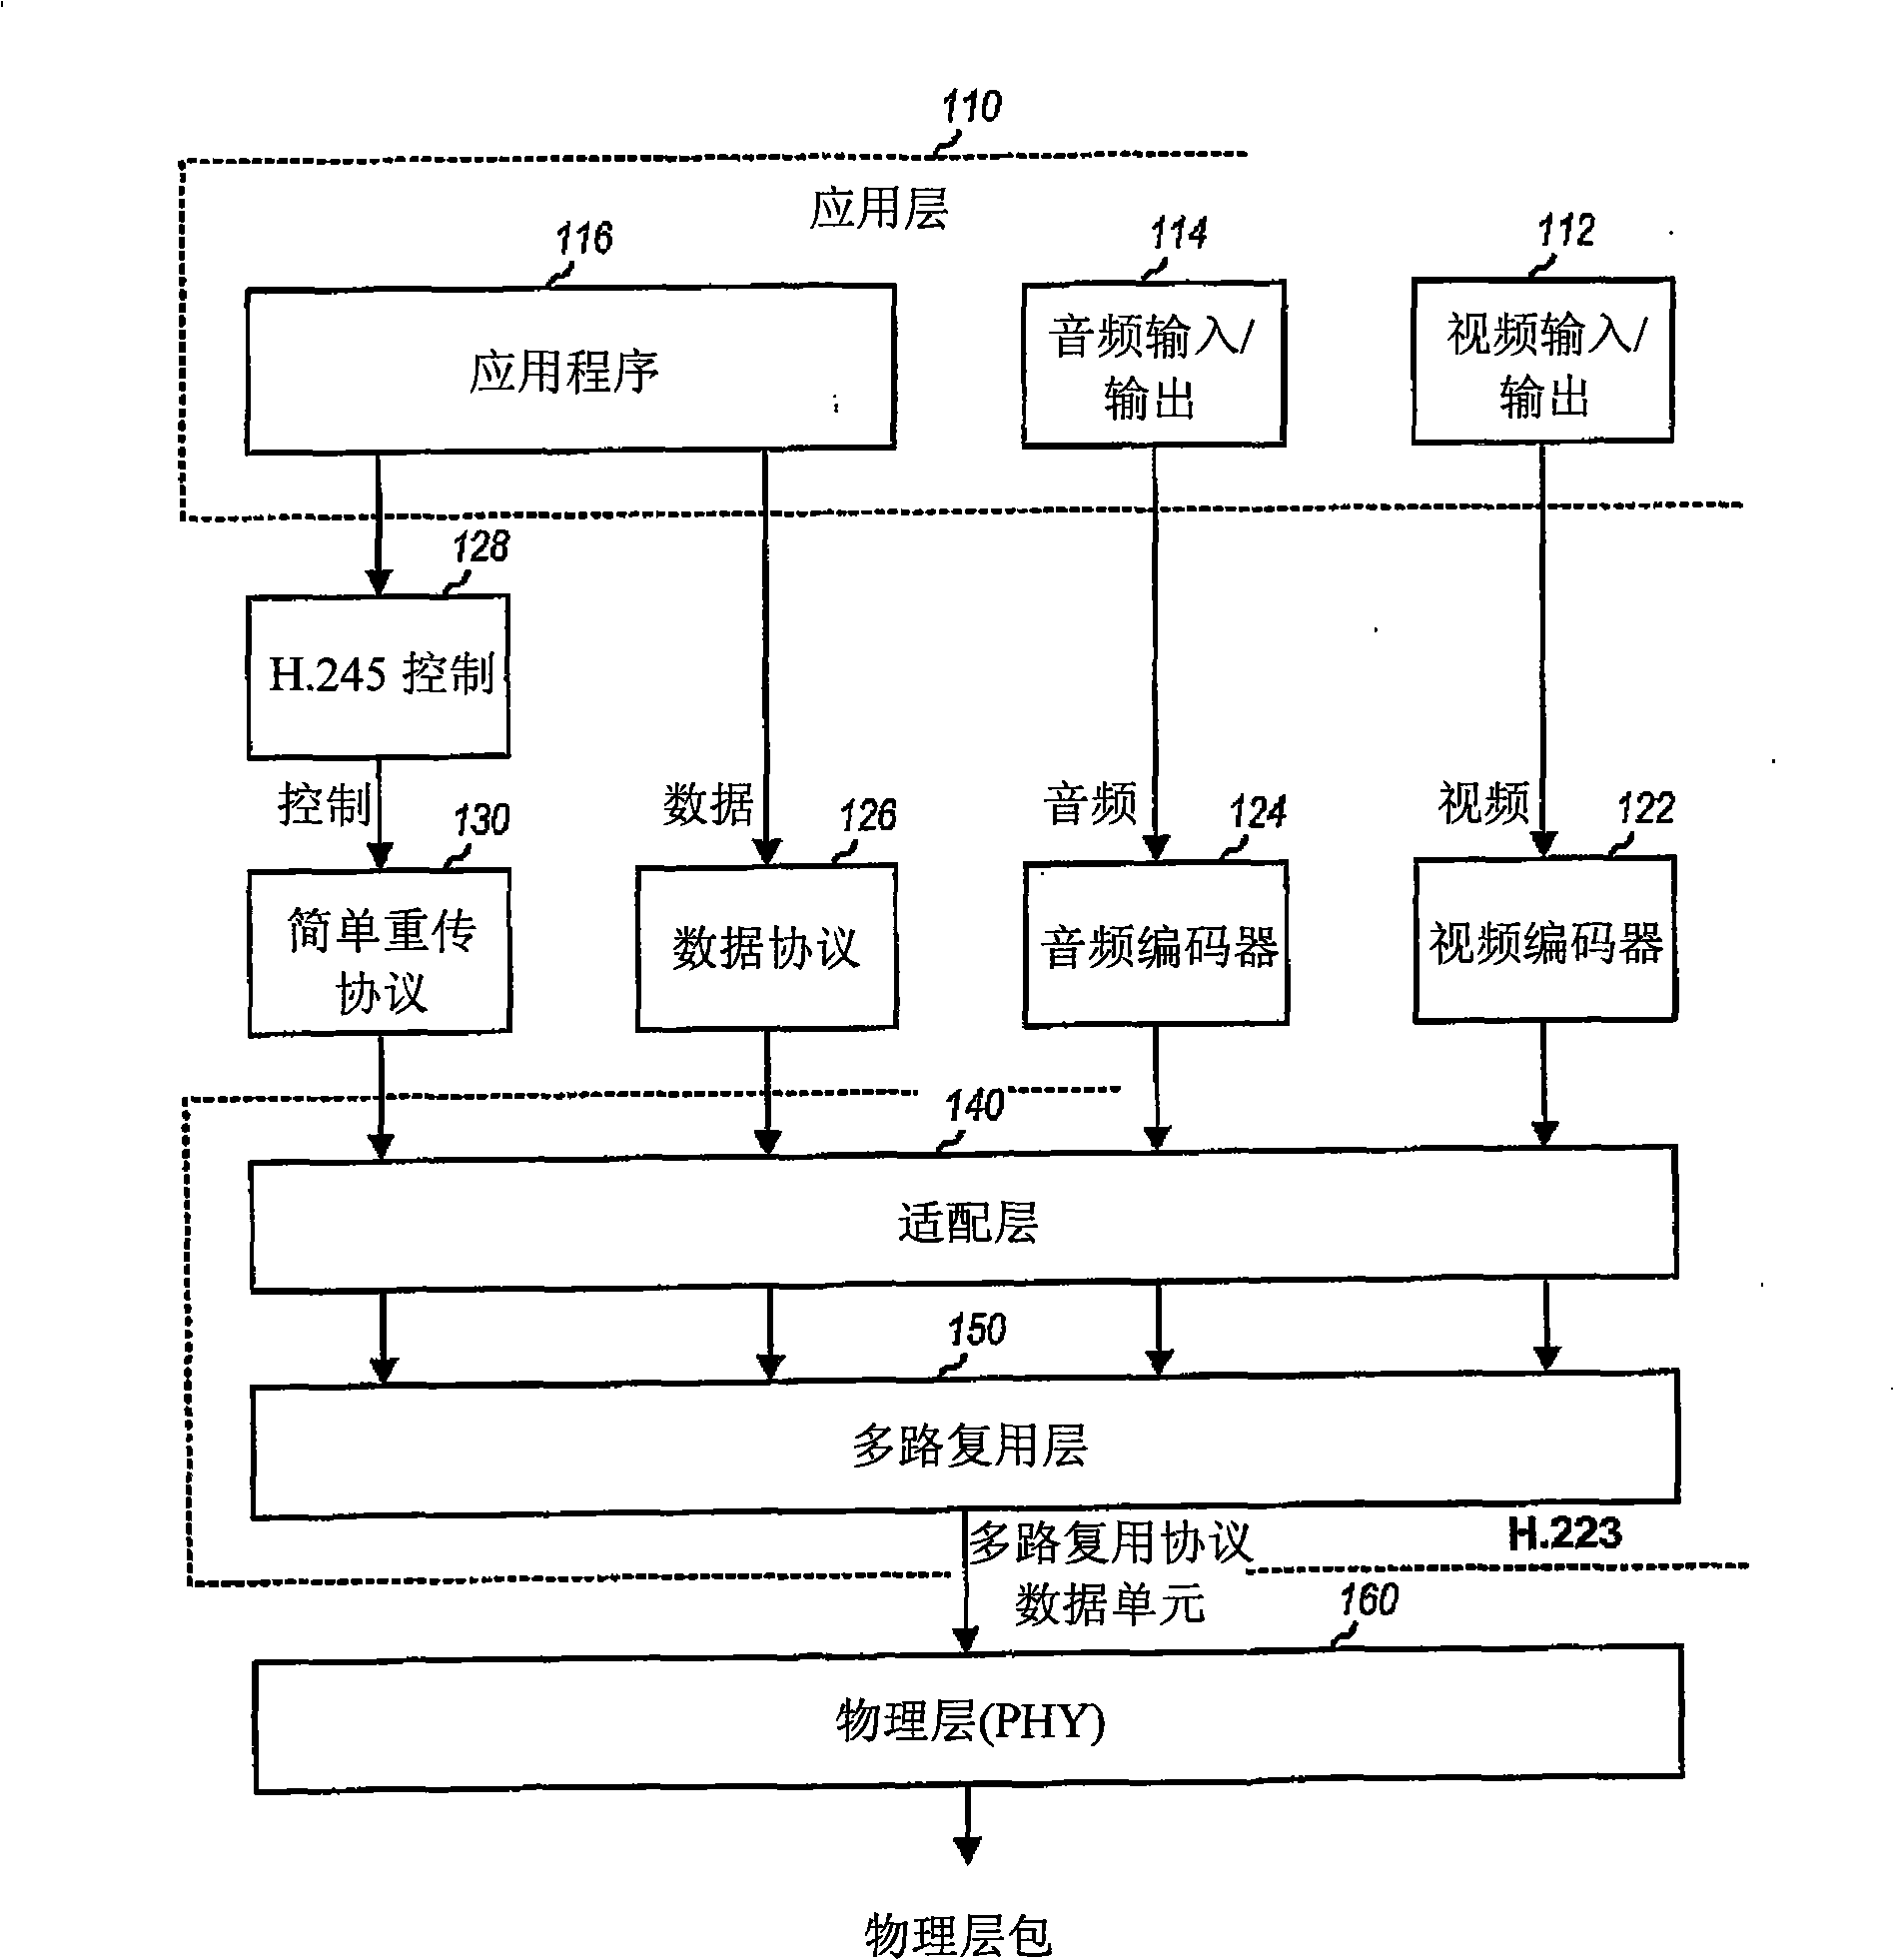 Transmission of multiplex protocol data units in physical layer packets